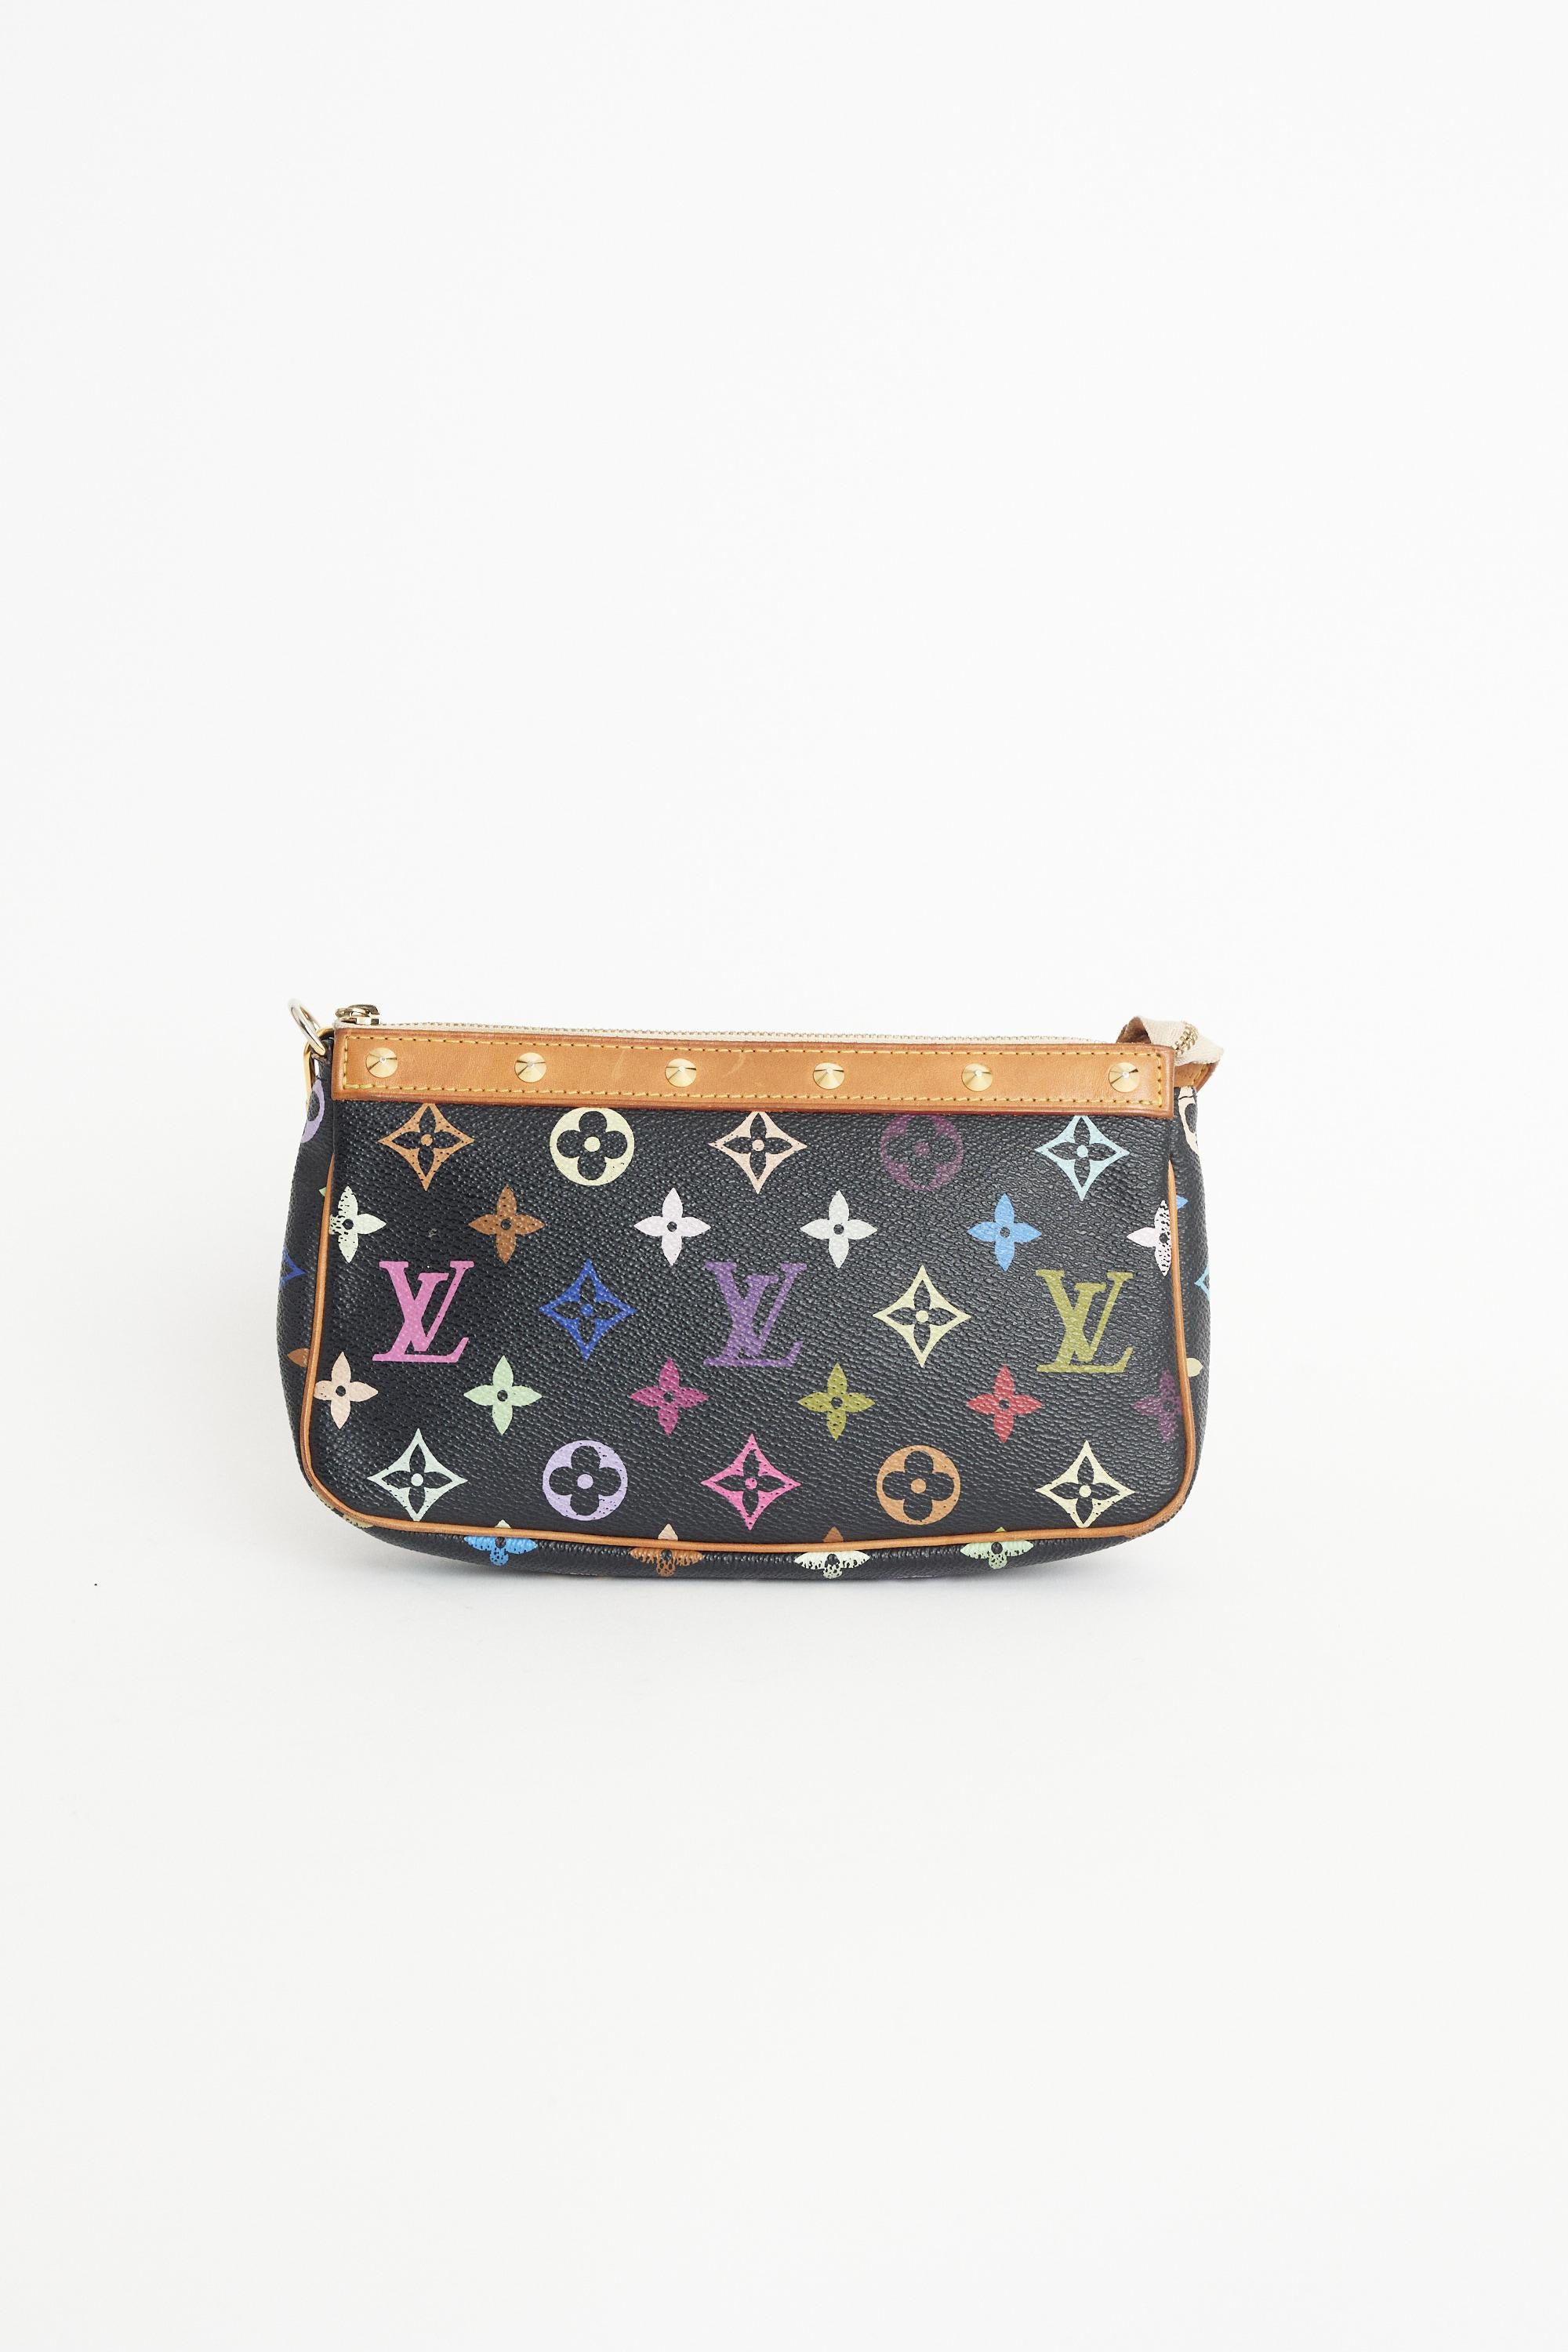 We are excited to present this iconic Louis Vuitton x Takashi Murakami 2003 black pochette bag. Features monogram print, zip closure and studding on the strap. In excellent vintage condition. Authenticity guaranteed.

Fabric: Leather
Dustbag: